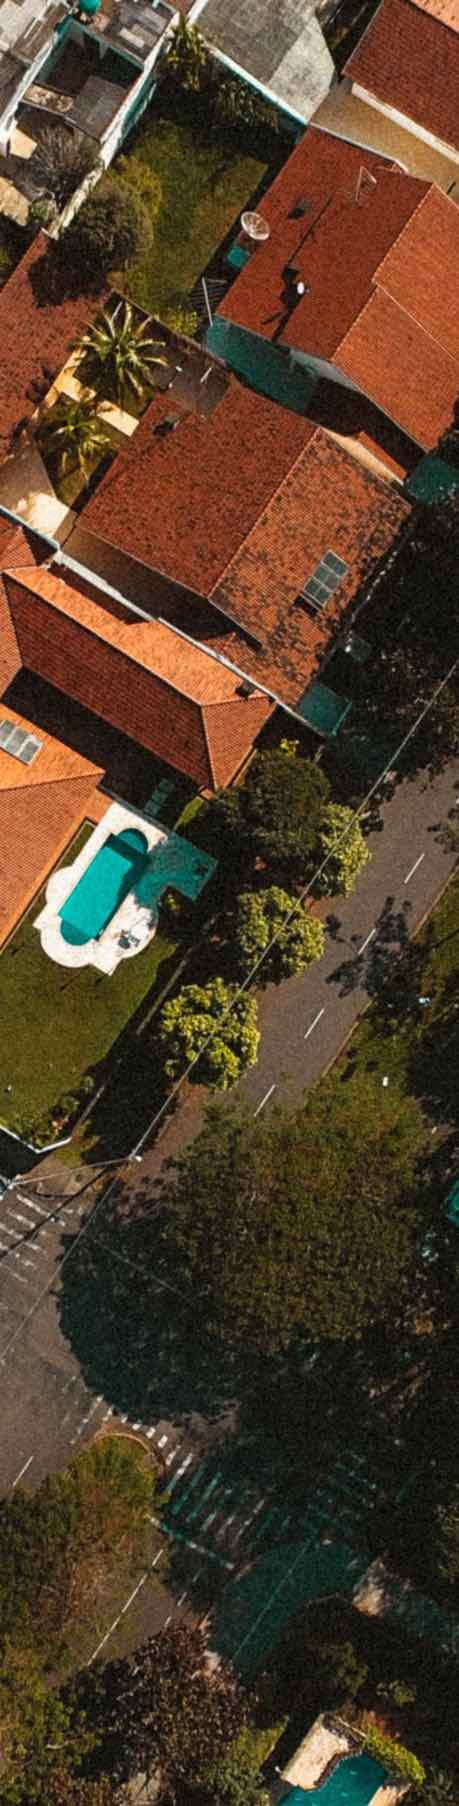 Your guide to property investing The Australian property market has performed consistently well over the last decade. This has inspired more people than ever before to invest in property.